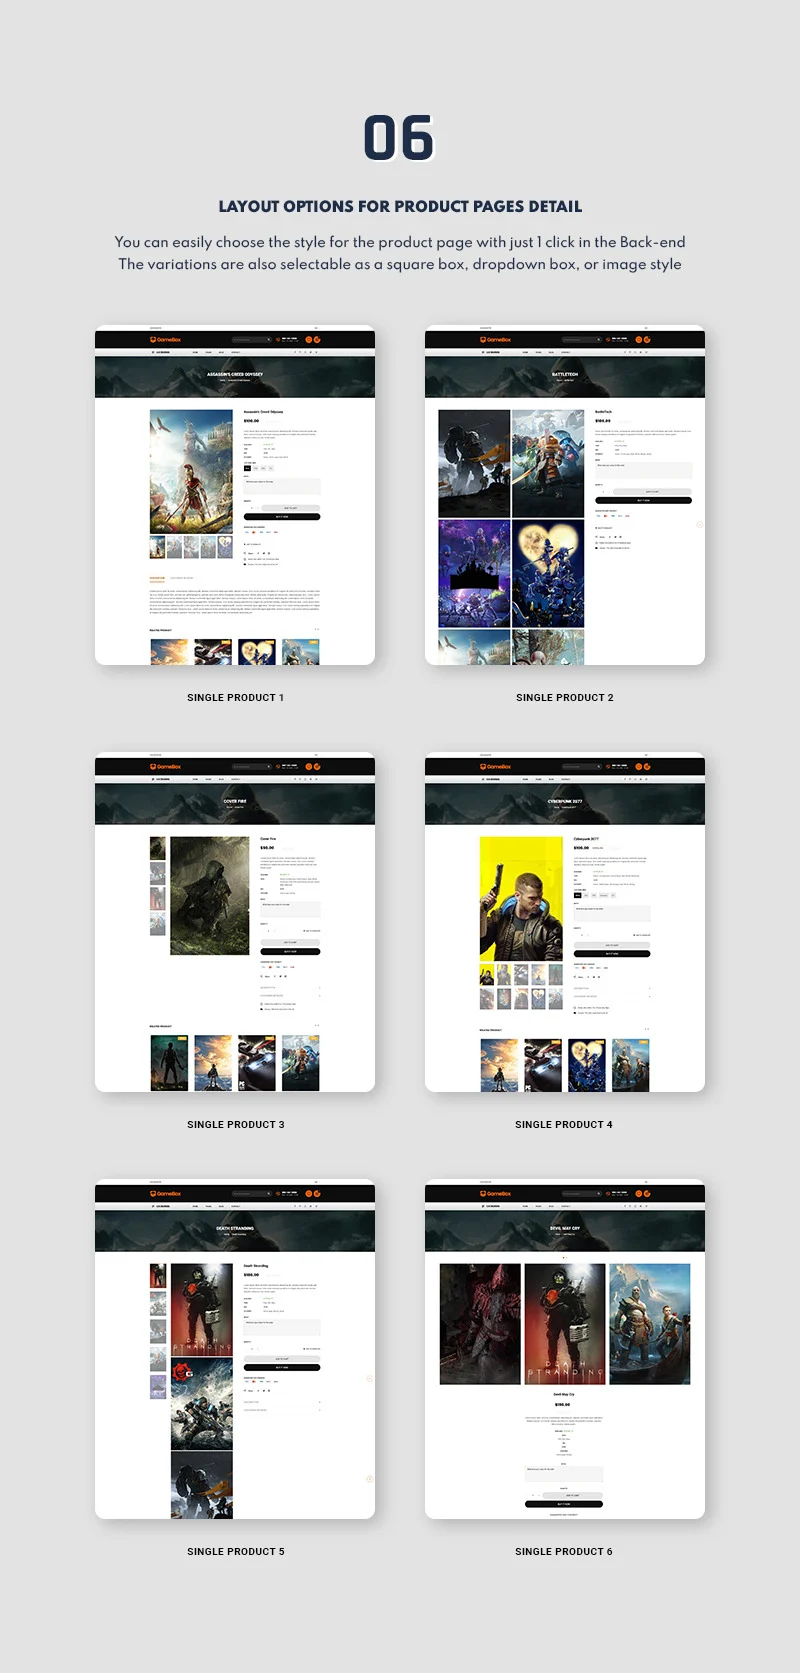 A set of 6 examples of layouts option for product pages detail on a gray background.